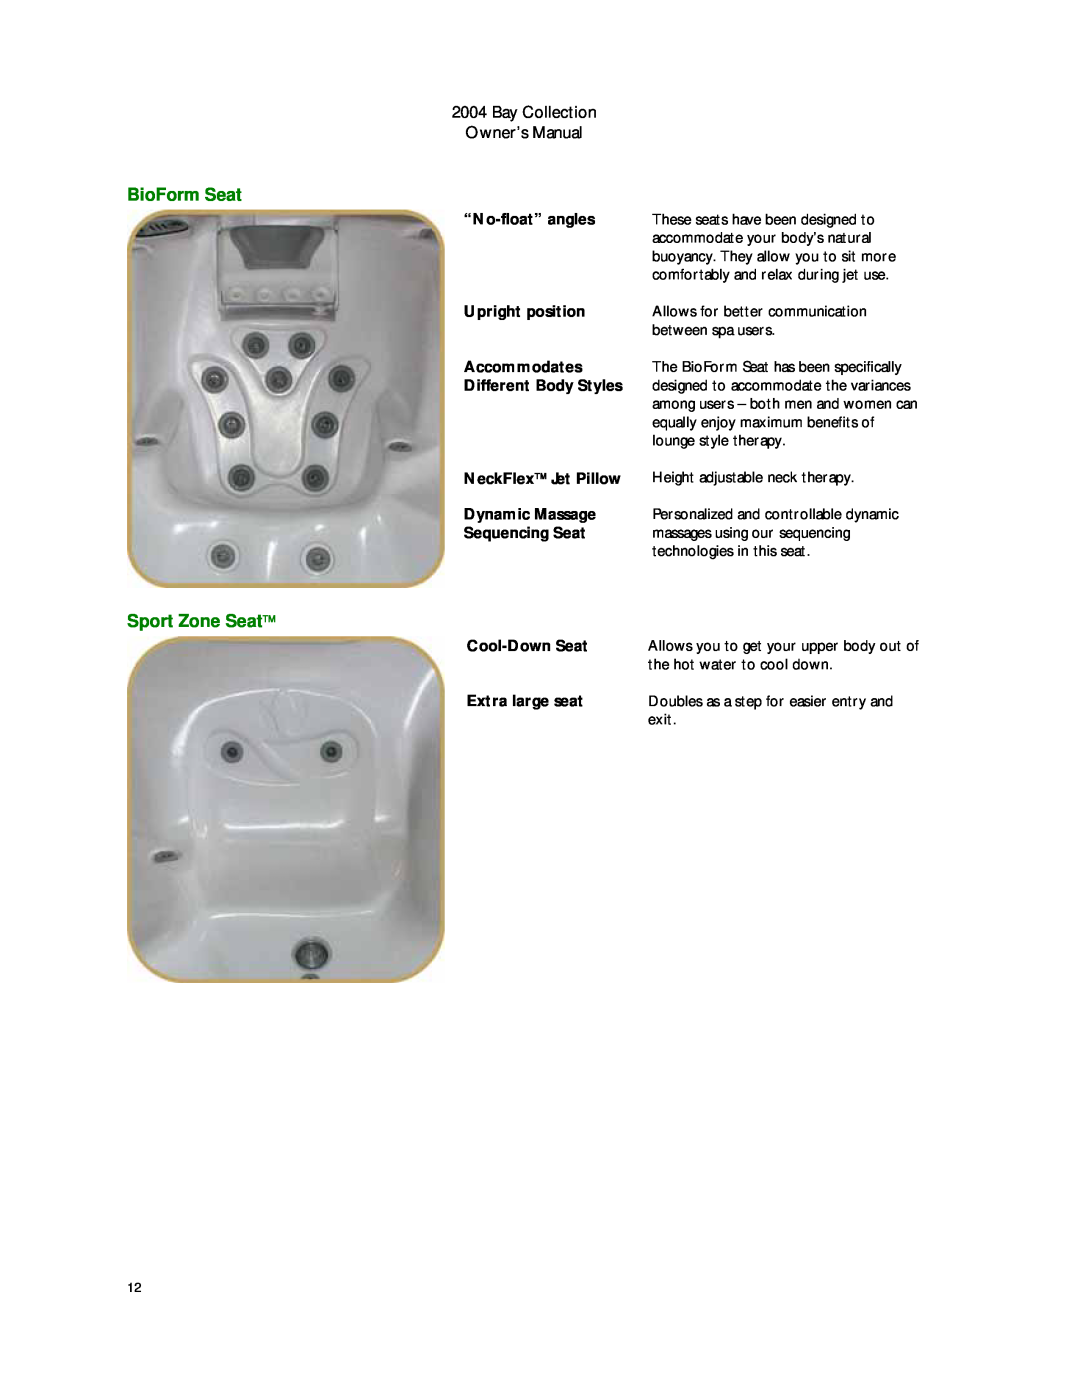 Dimension One Spas Bay Collection BioForm Seat, Sport Zone Seat, “No-float” angles, Upright position, Accommodates, exit 